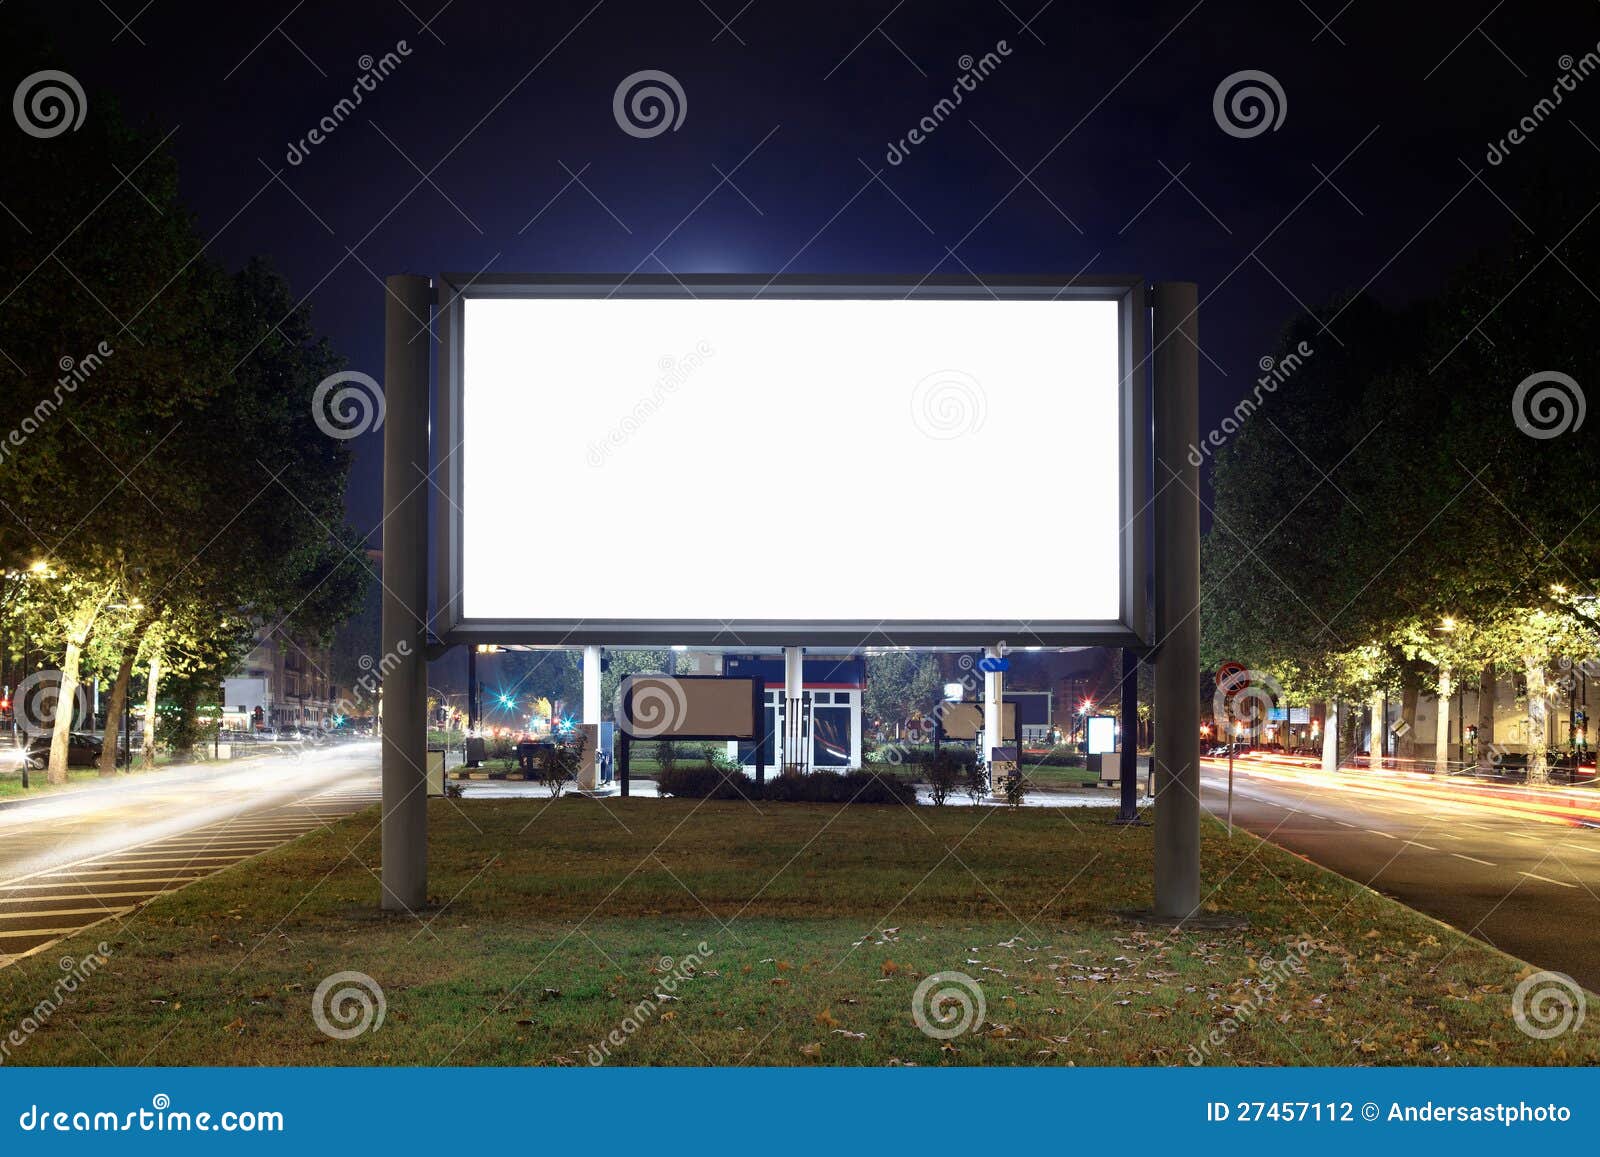 Blank billboard at night, clipping path included.